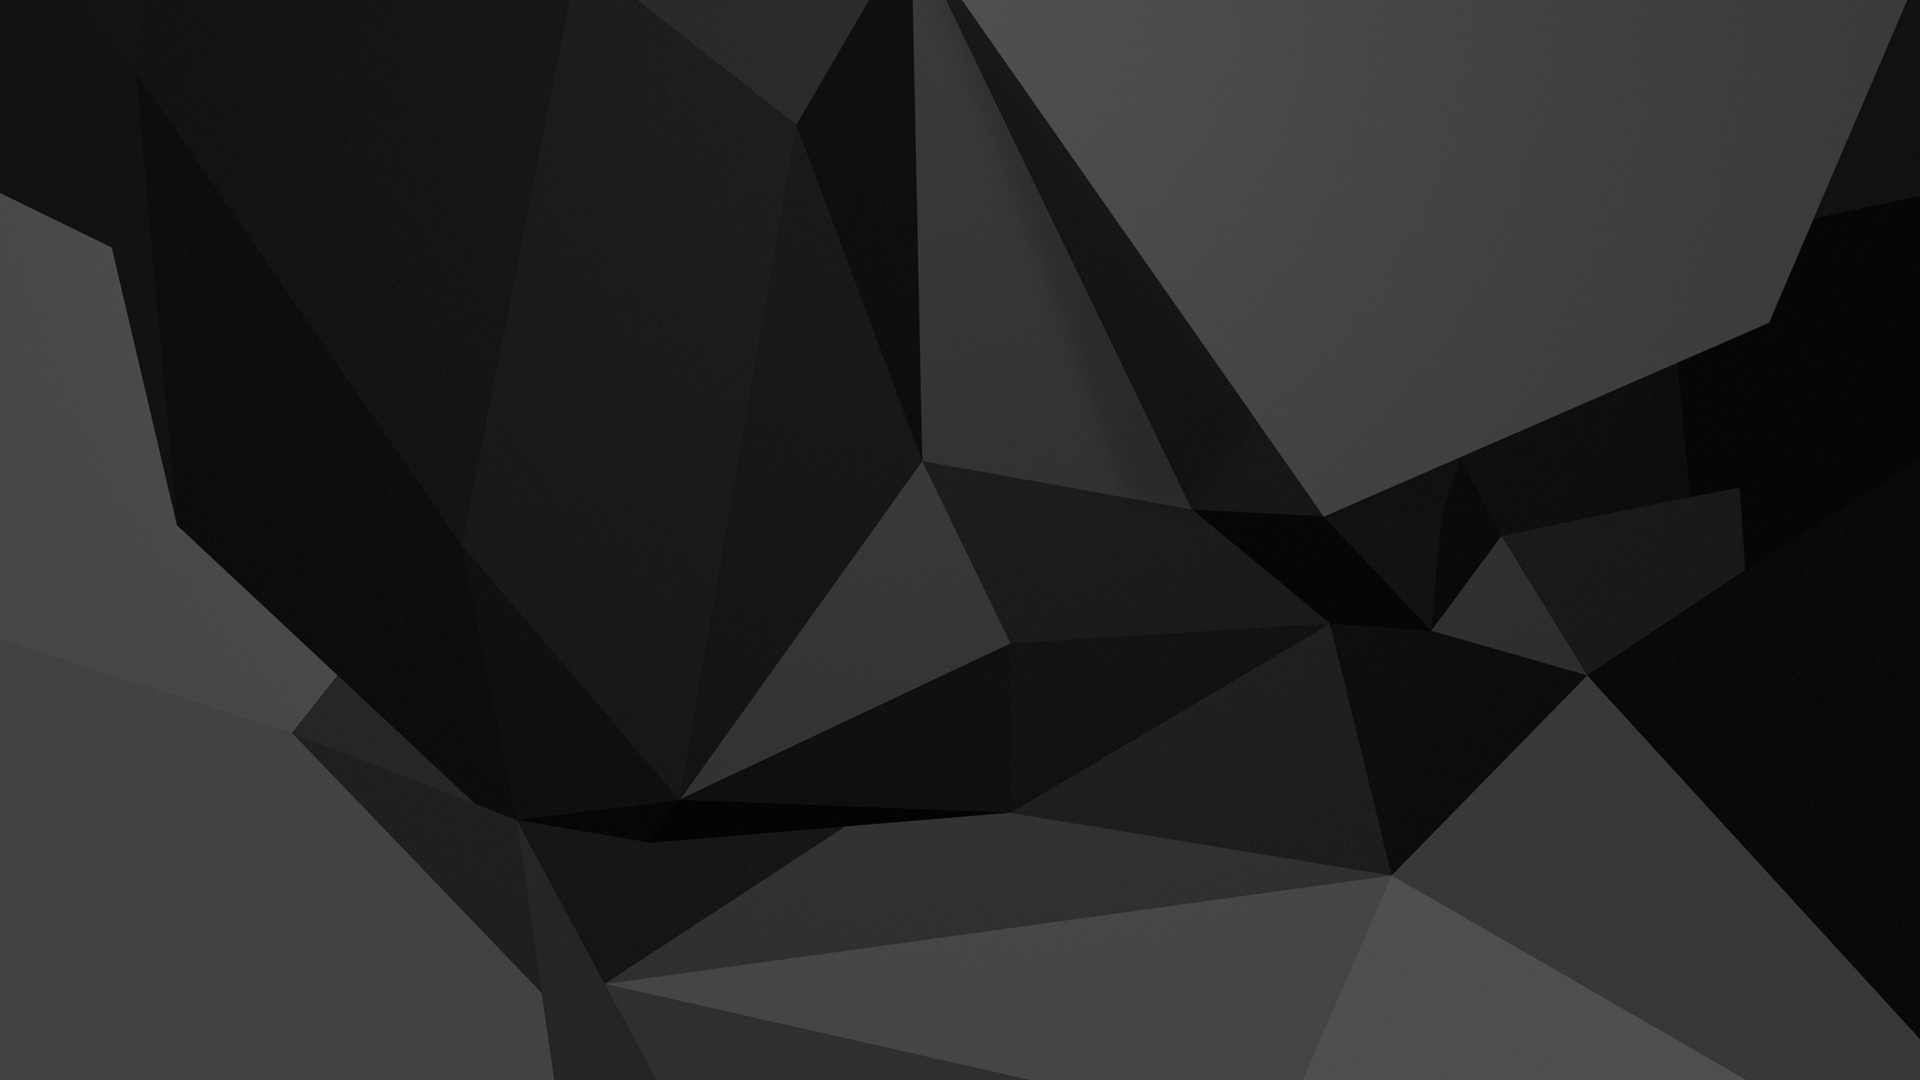 Black and White Abstract Illustration. Wallpaper in 1920x1080 Resolution